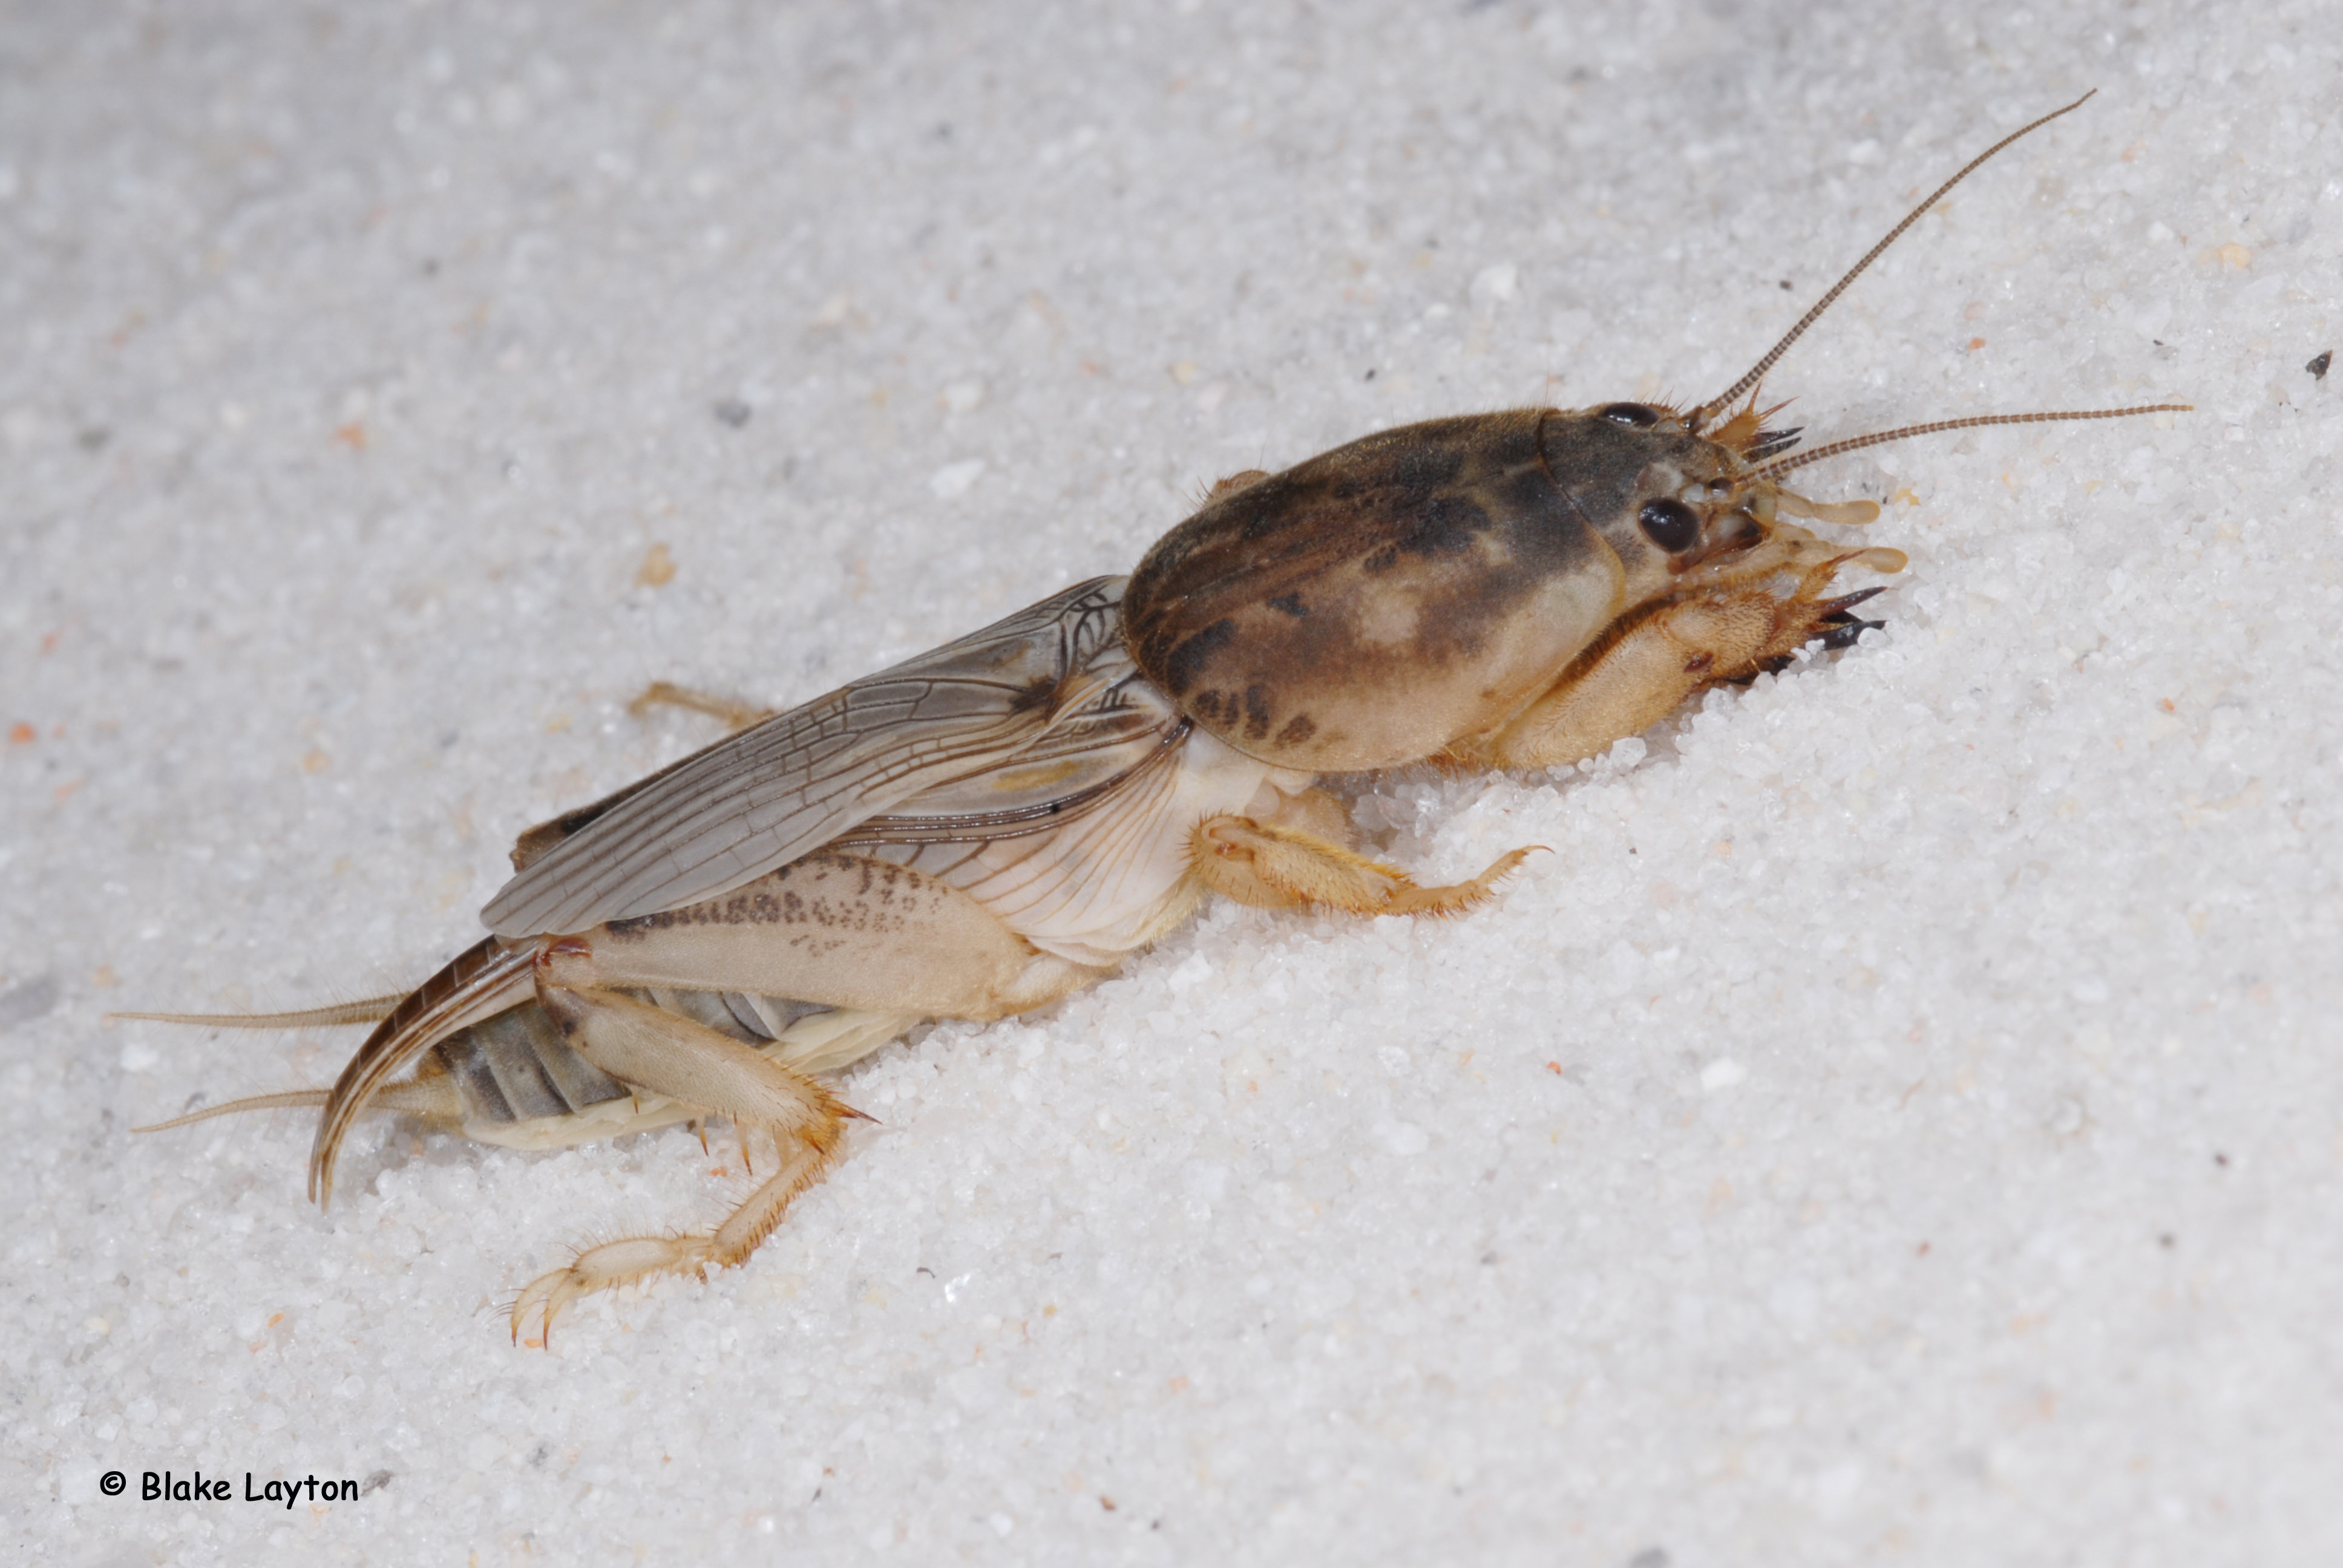  a southern mole cricket crawling in white sand.